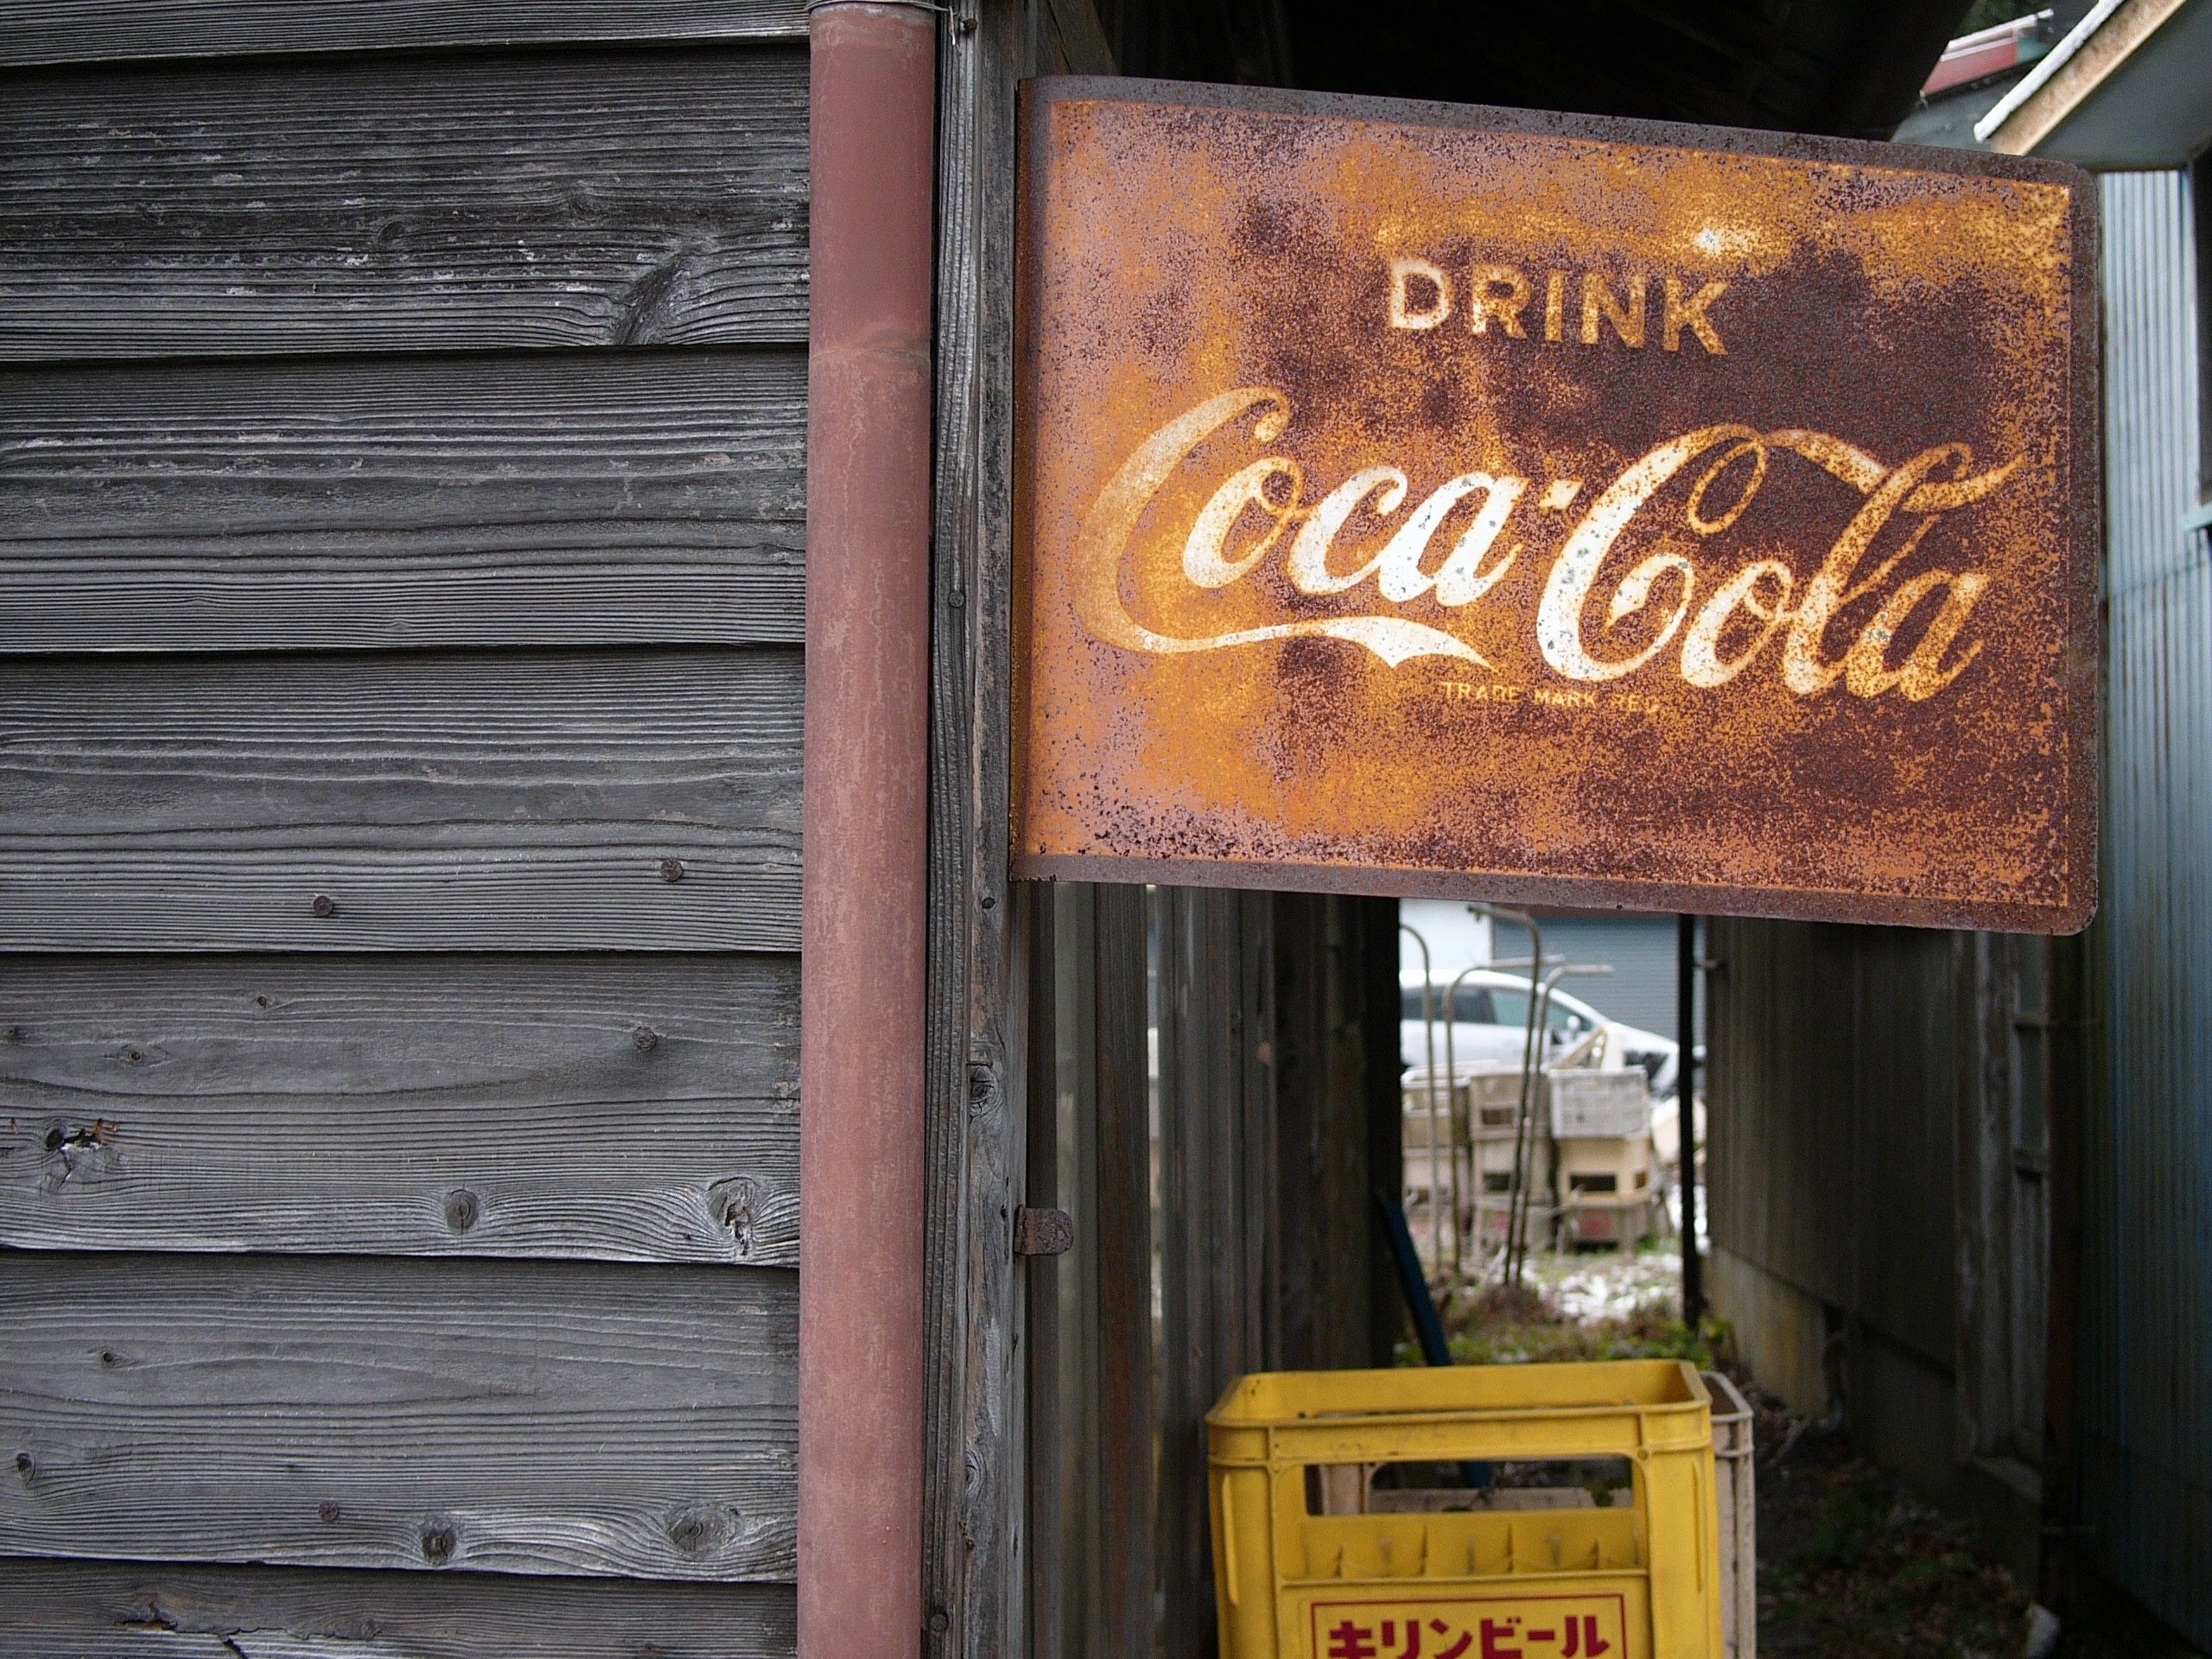 A rusty Coca-Coca sign affixed to a shed.